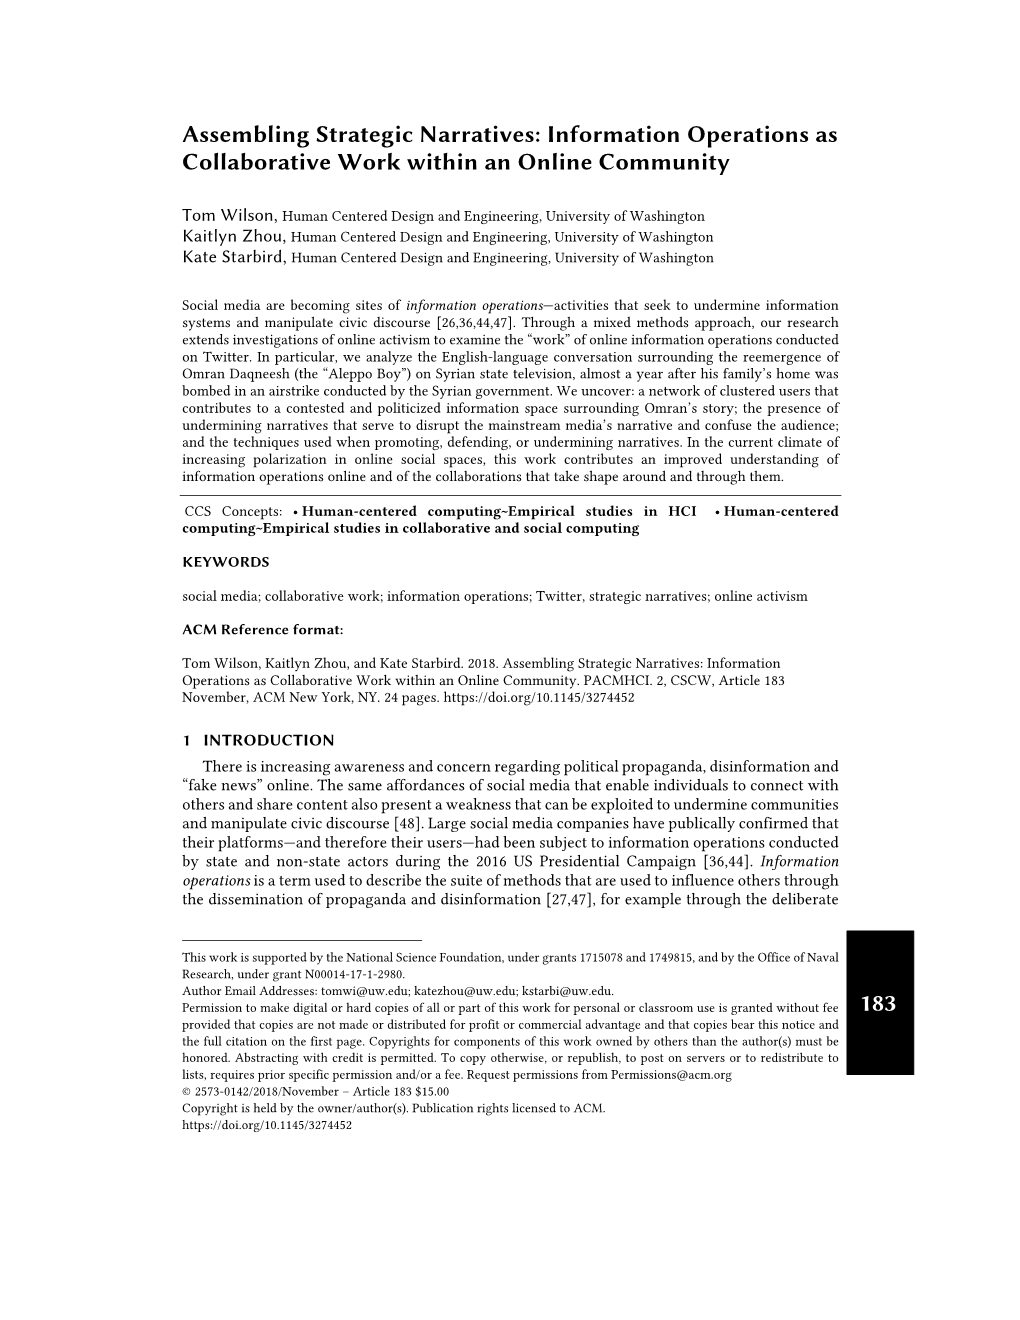 Assembling Strategic Narratives: Information Operations As Collaborative Work Within an Online Community